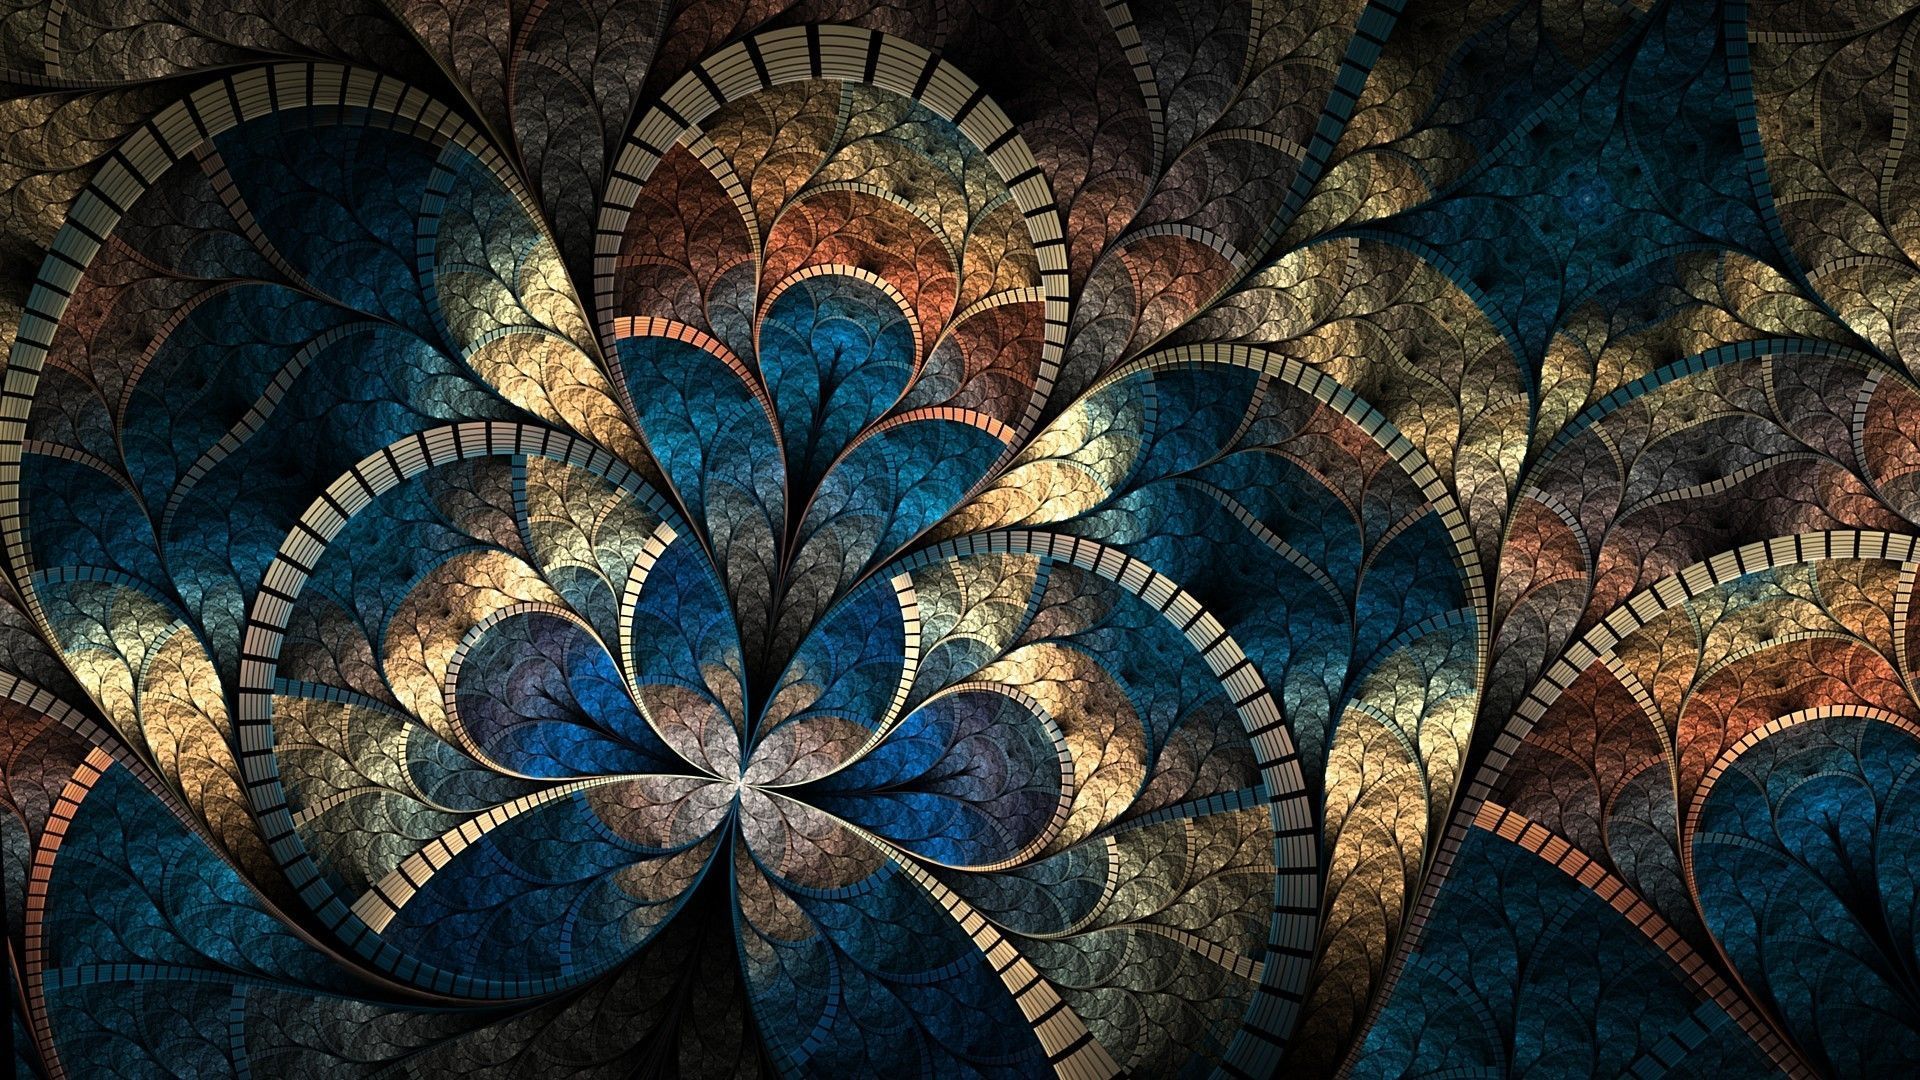 Gallery for - abstract art wallpaper 1920x1080